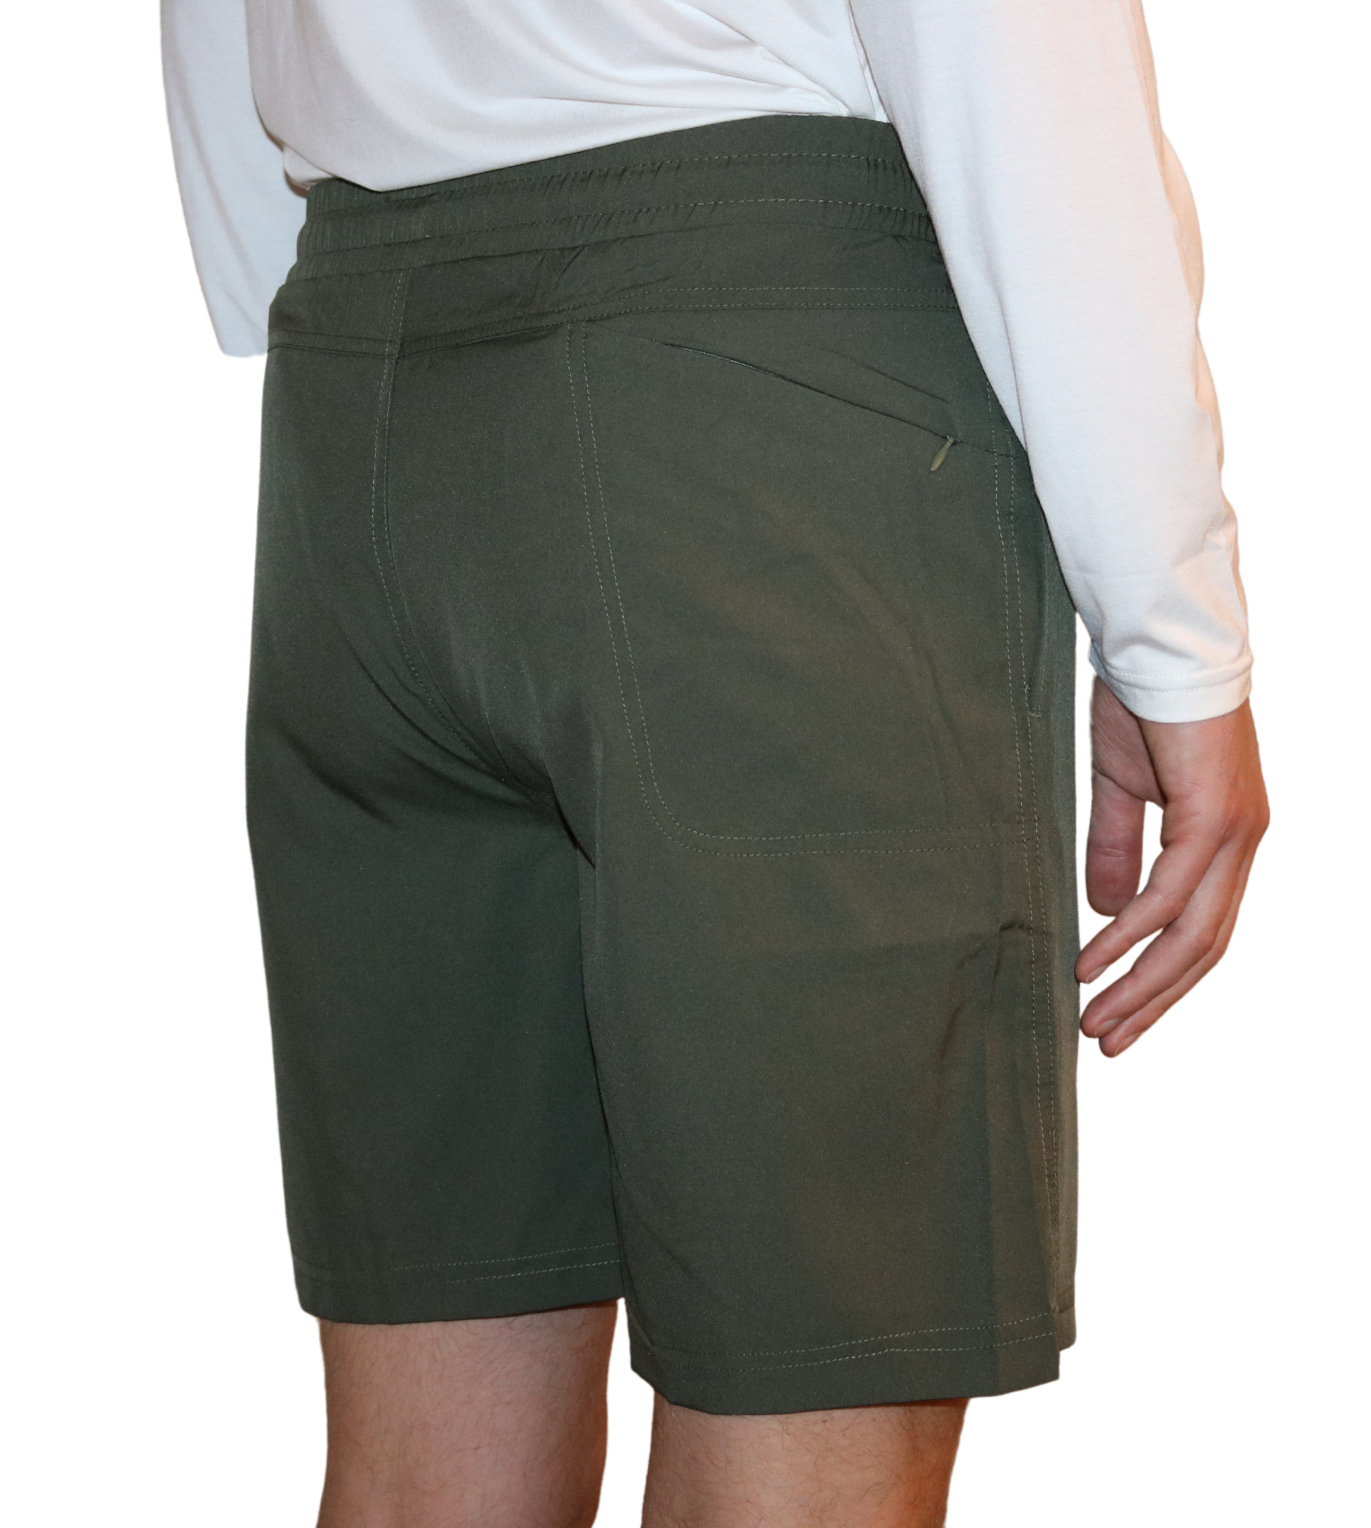 Back of the Bamboo Lined Sabalo Fishing Shorts. These fishing shorts are perfect for long days on the water.